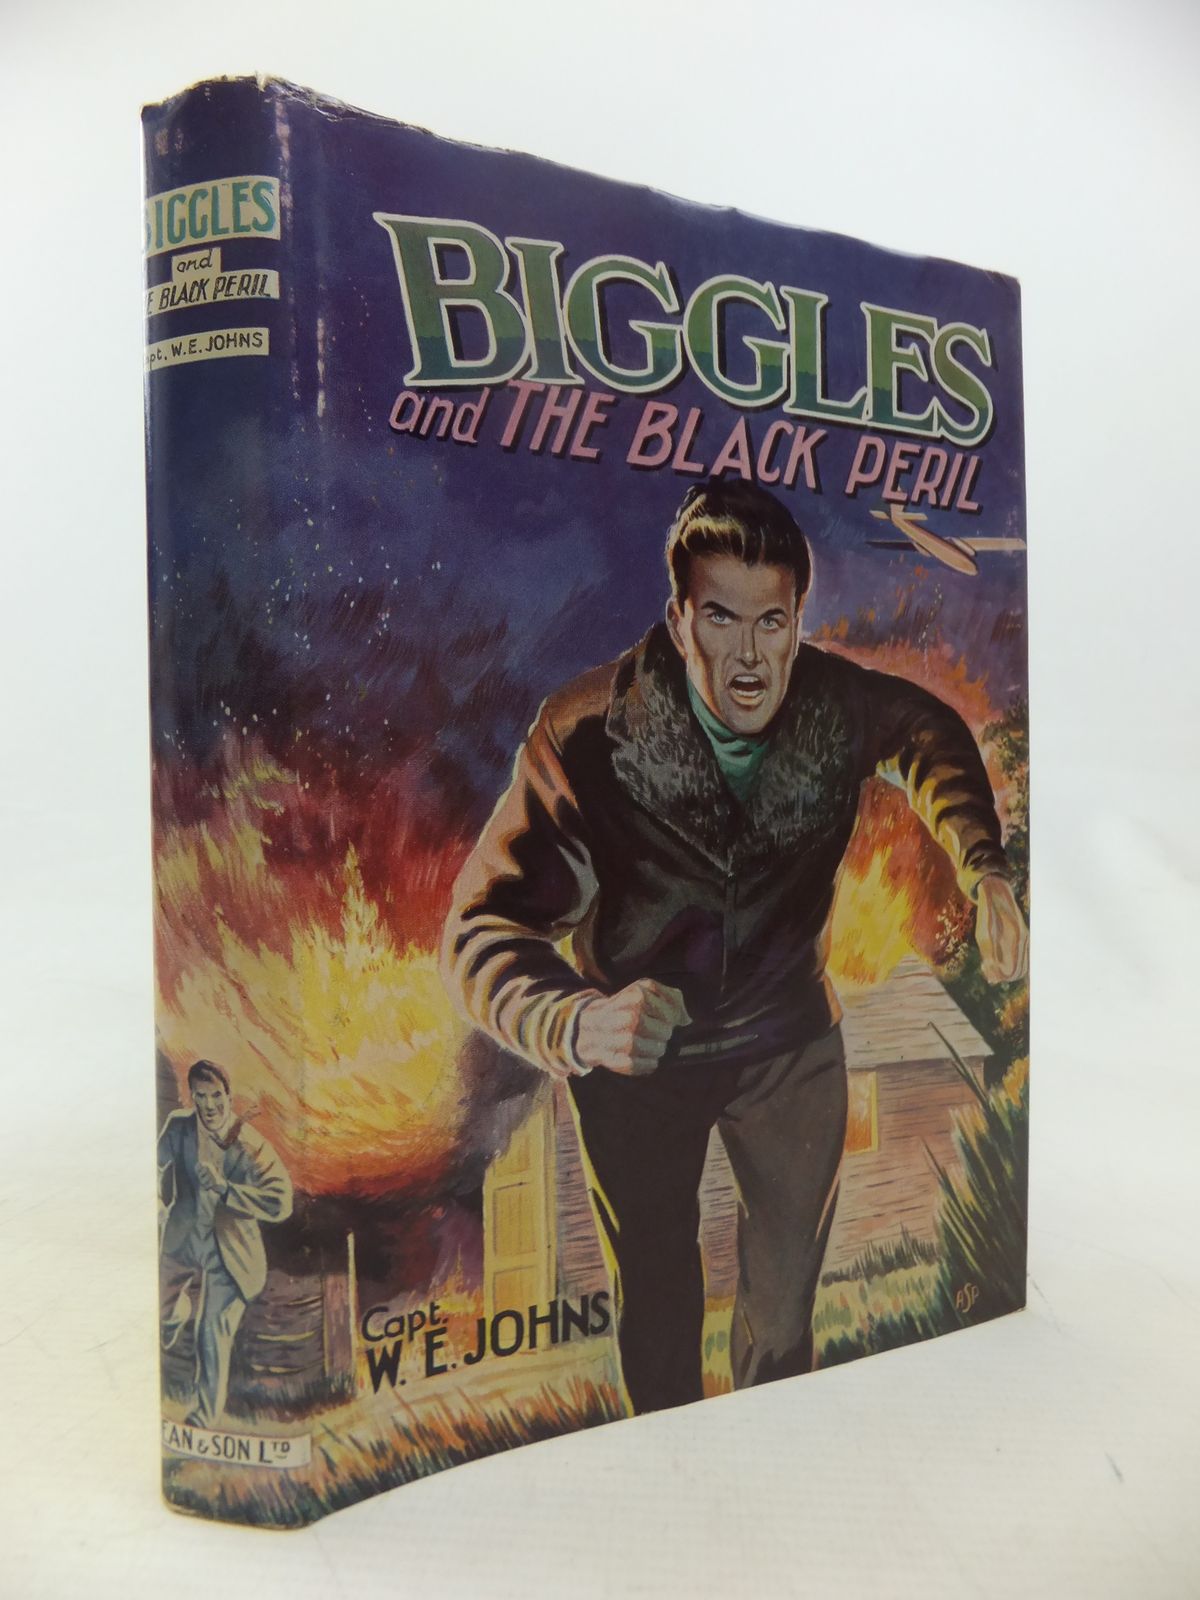 Cover of BIGGLES AND THE BLACK PERIL by W.E. Johns